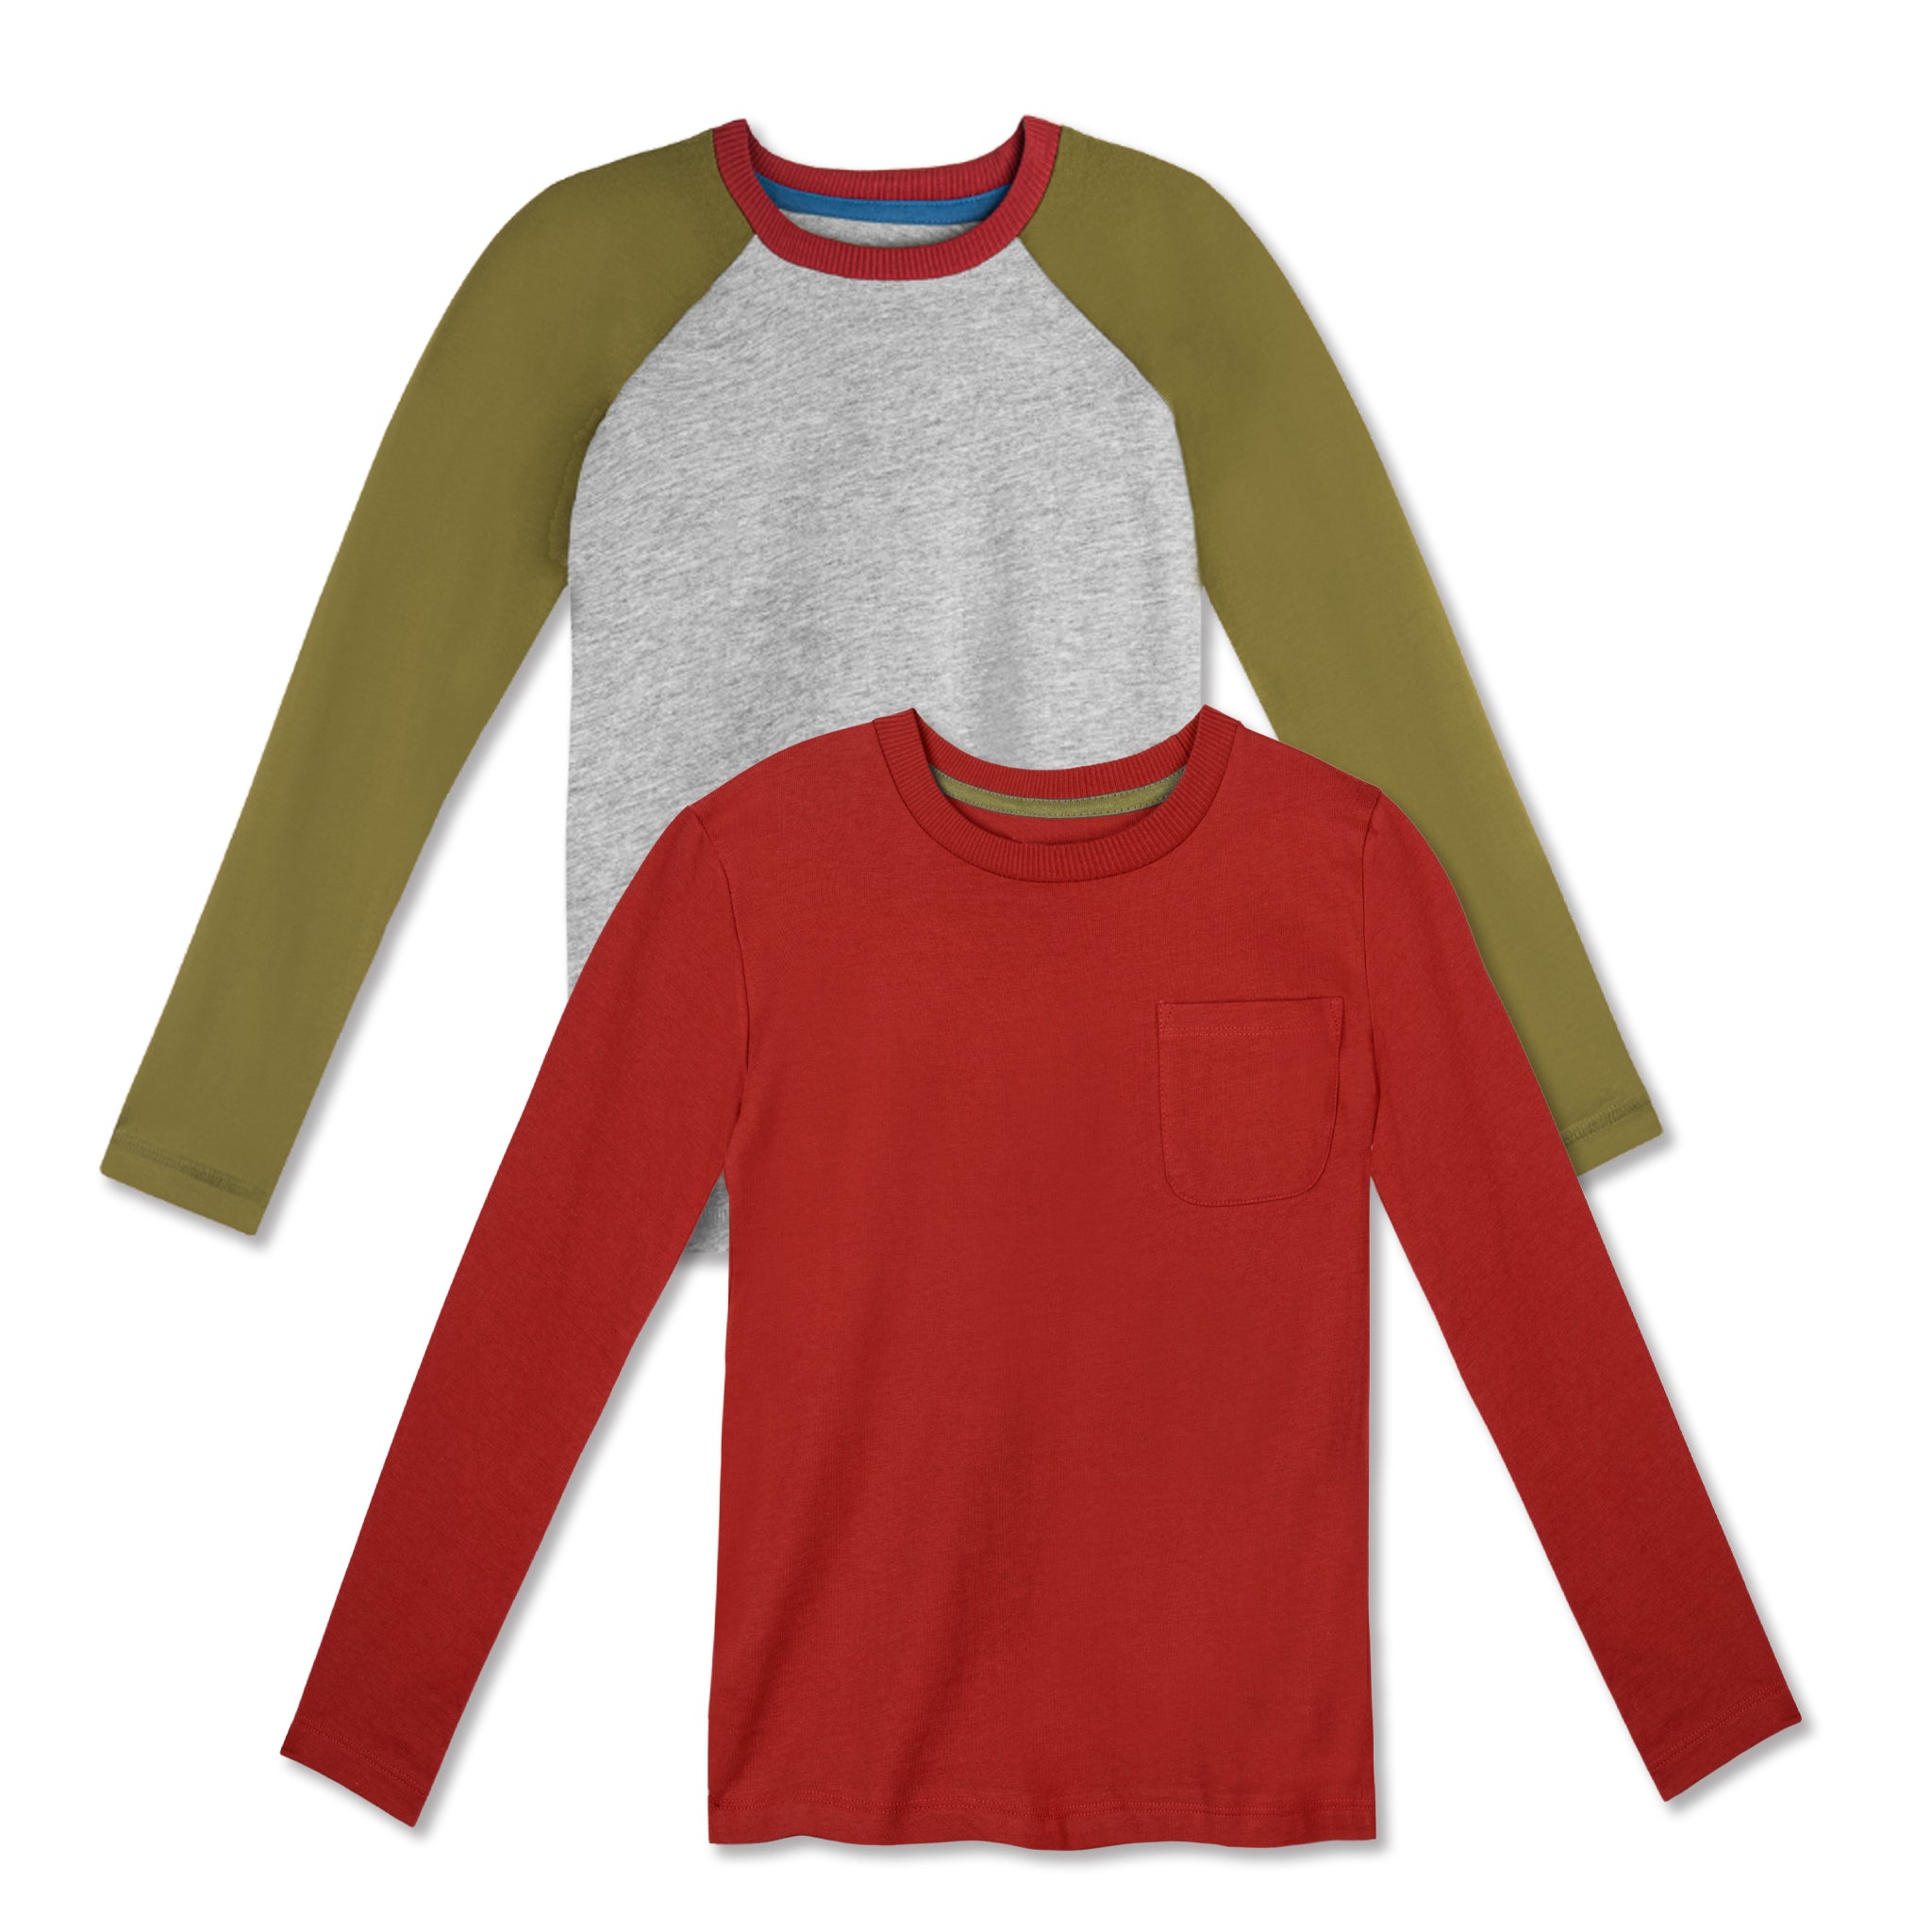 Organic Cotton Kids Shirts - Long Sleeve Tee 2 Pack - Mightly